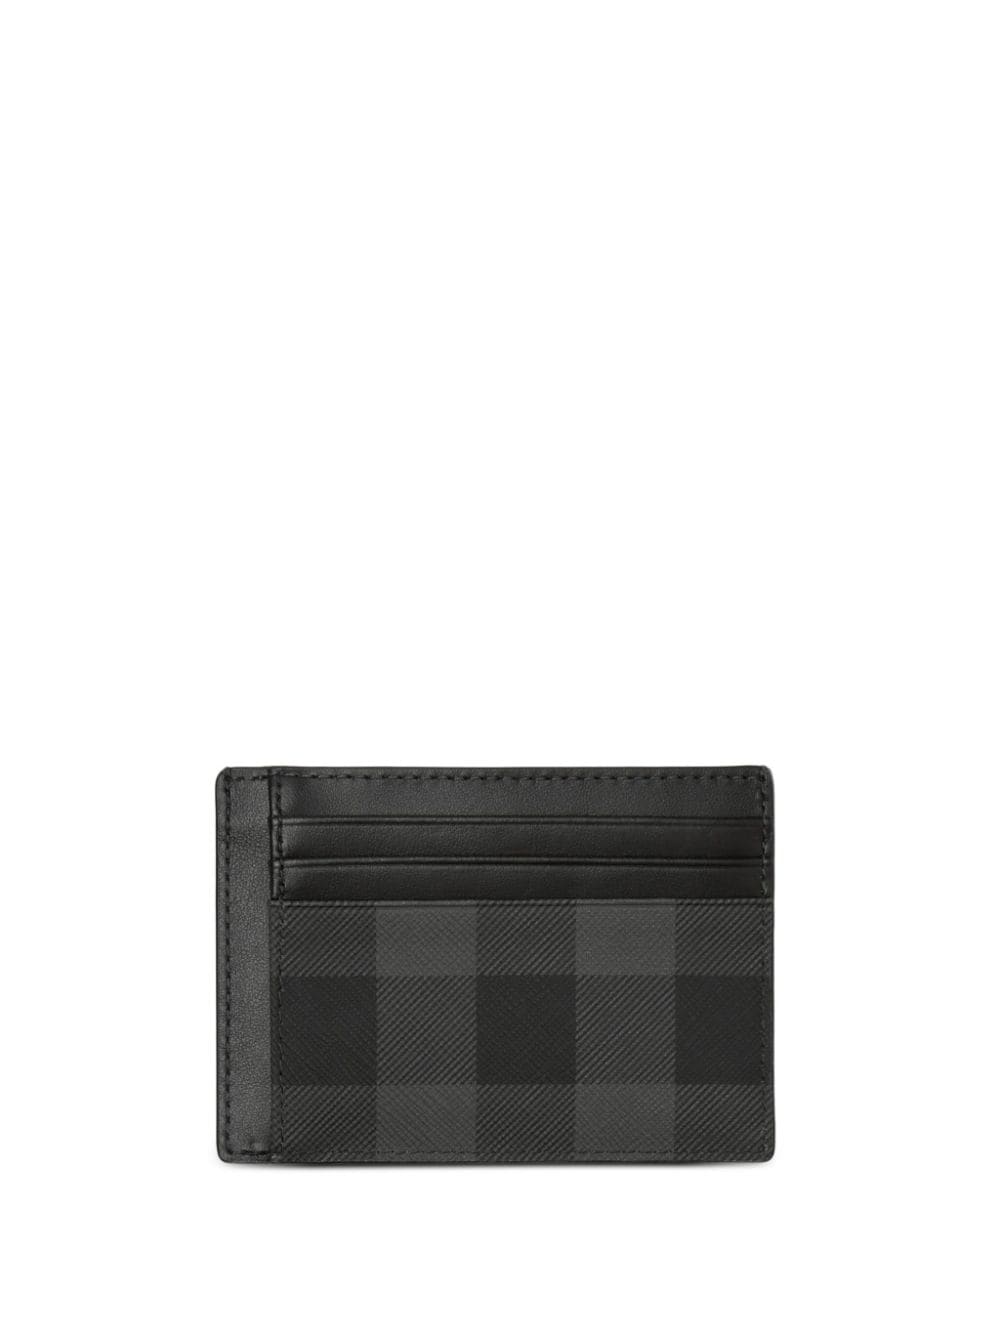 Burberry London Check Money Clip Wallet, Grey, One Size In